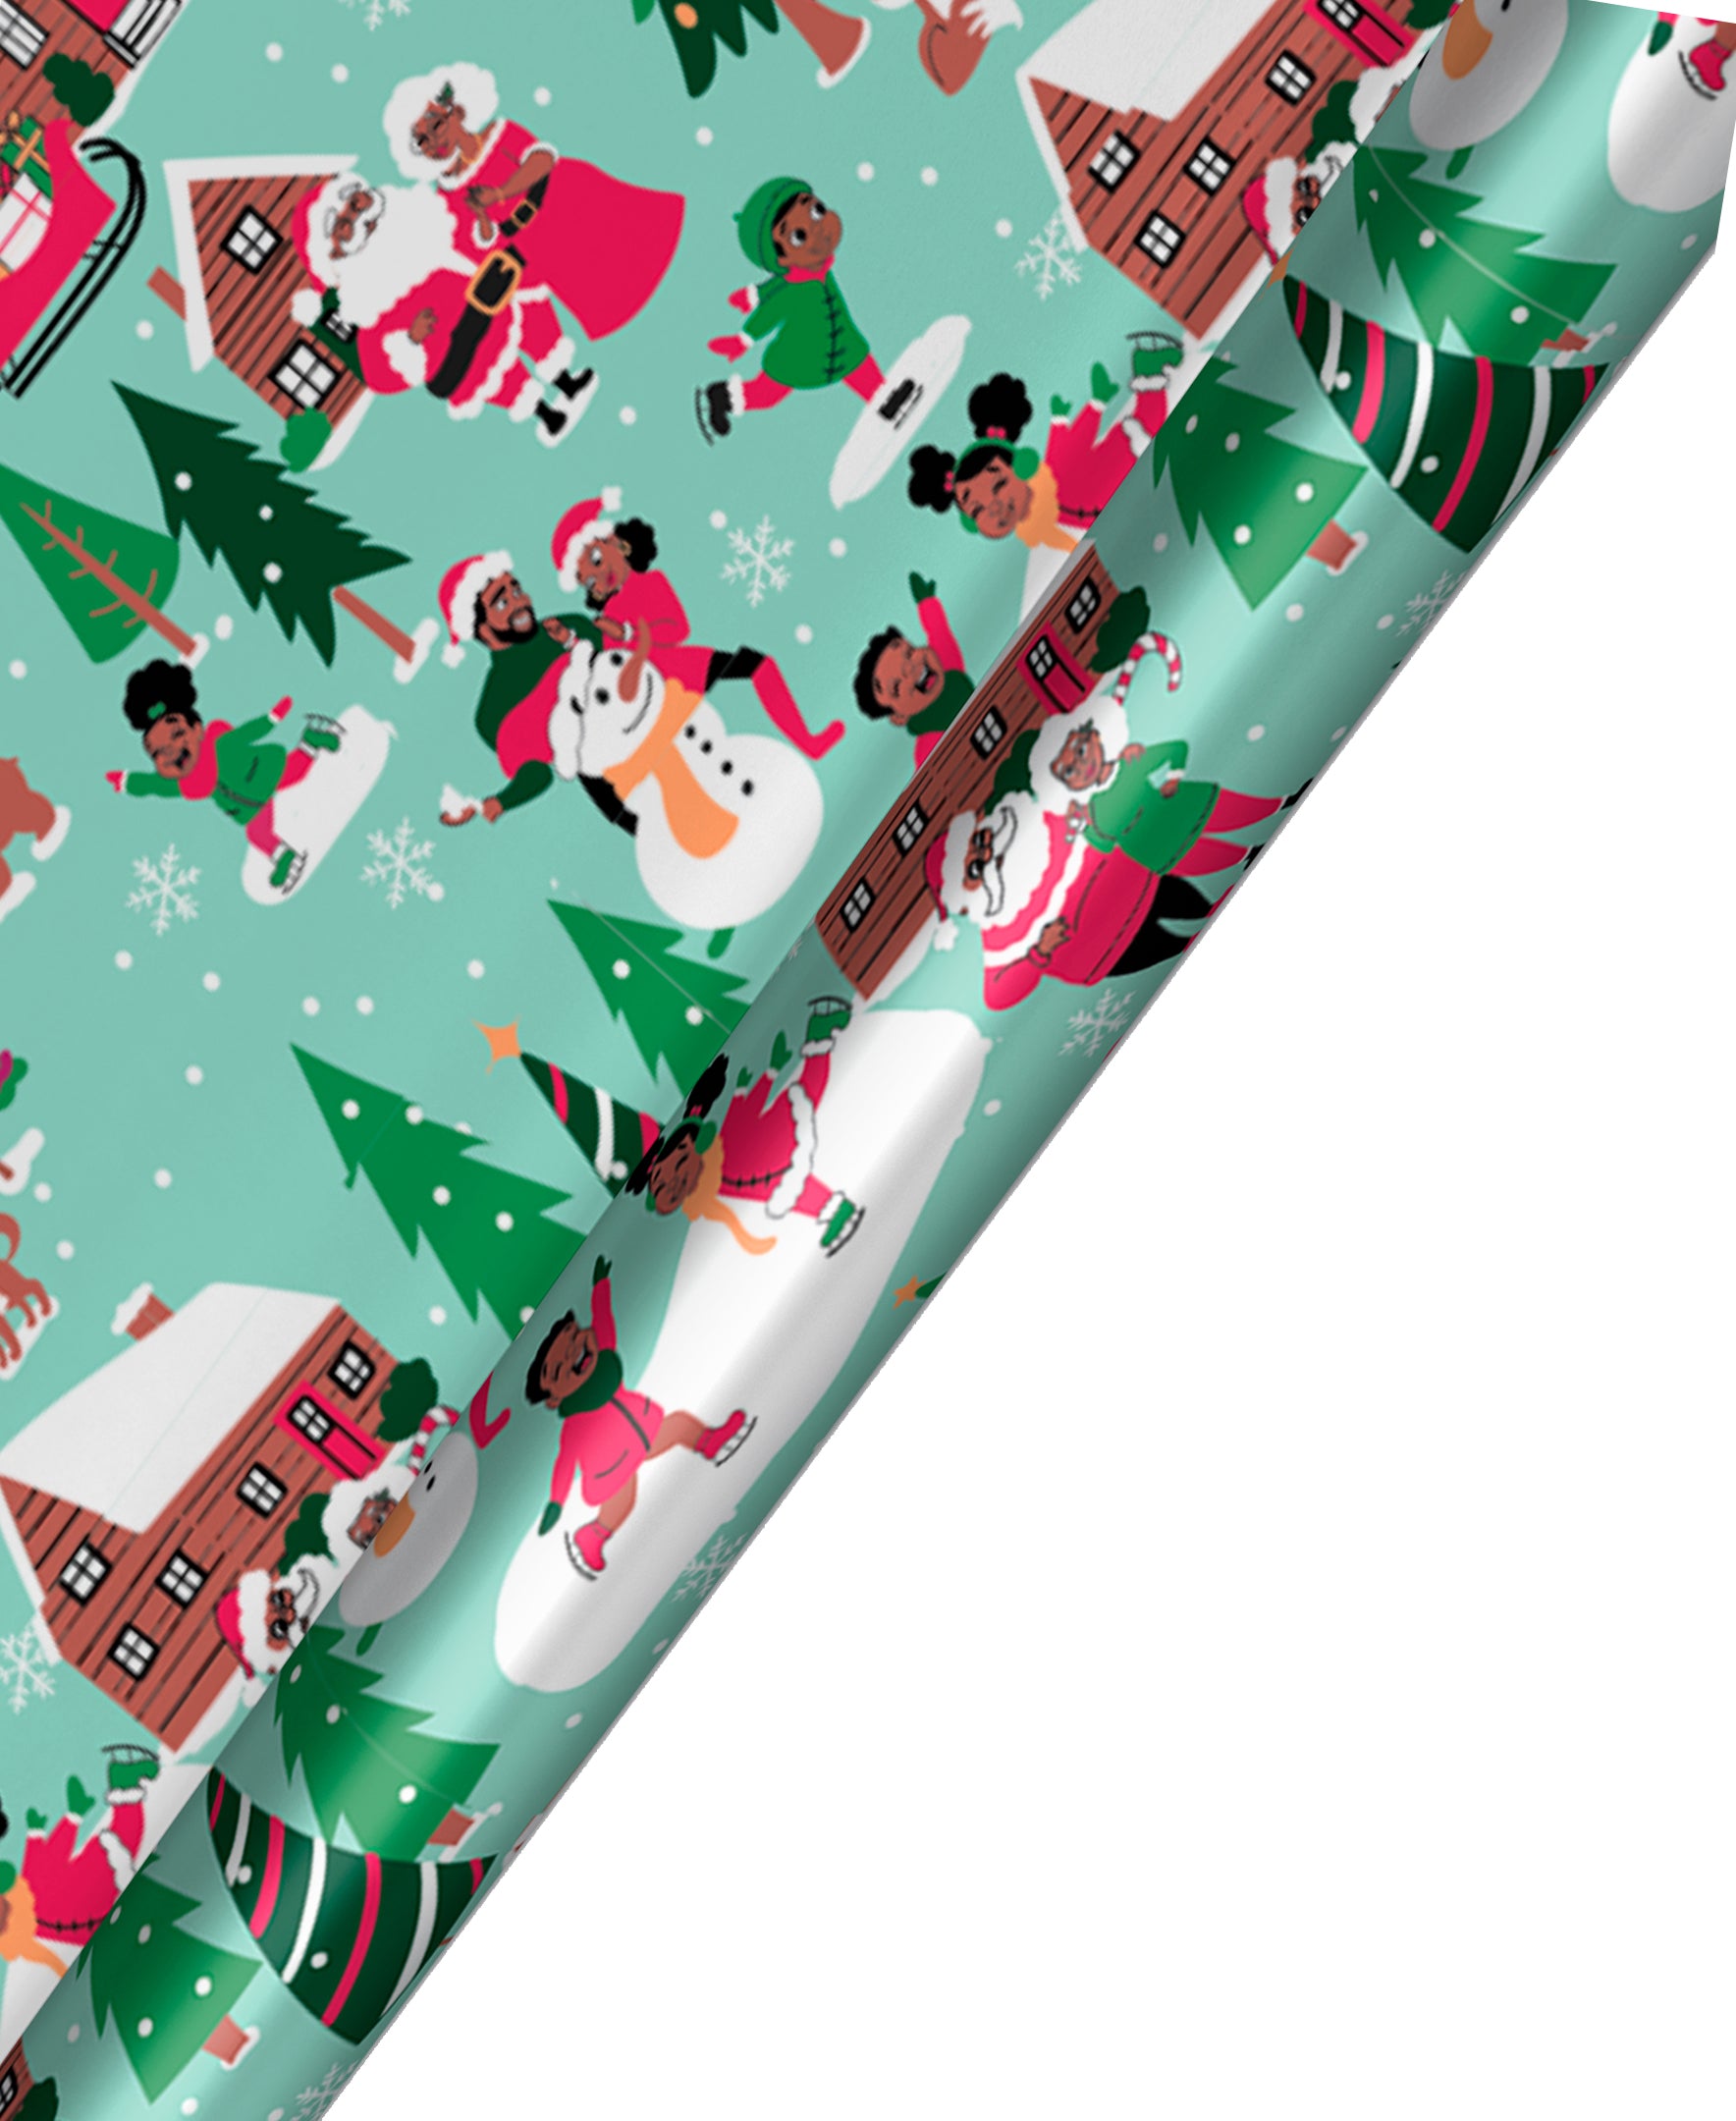 Black Girls Rock Holiday Wrapping Paper – Designs By Dij